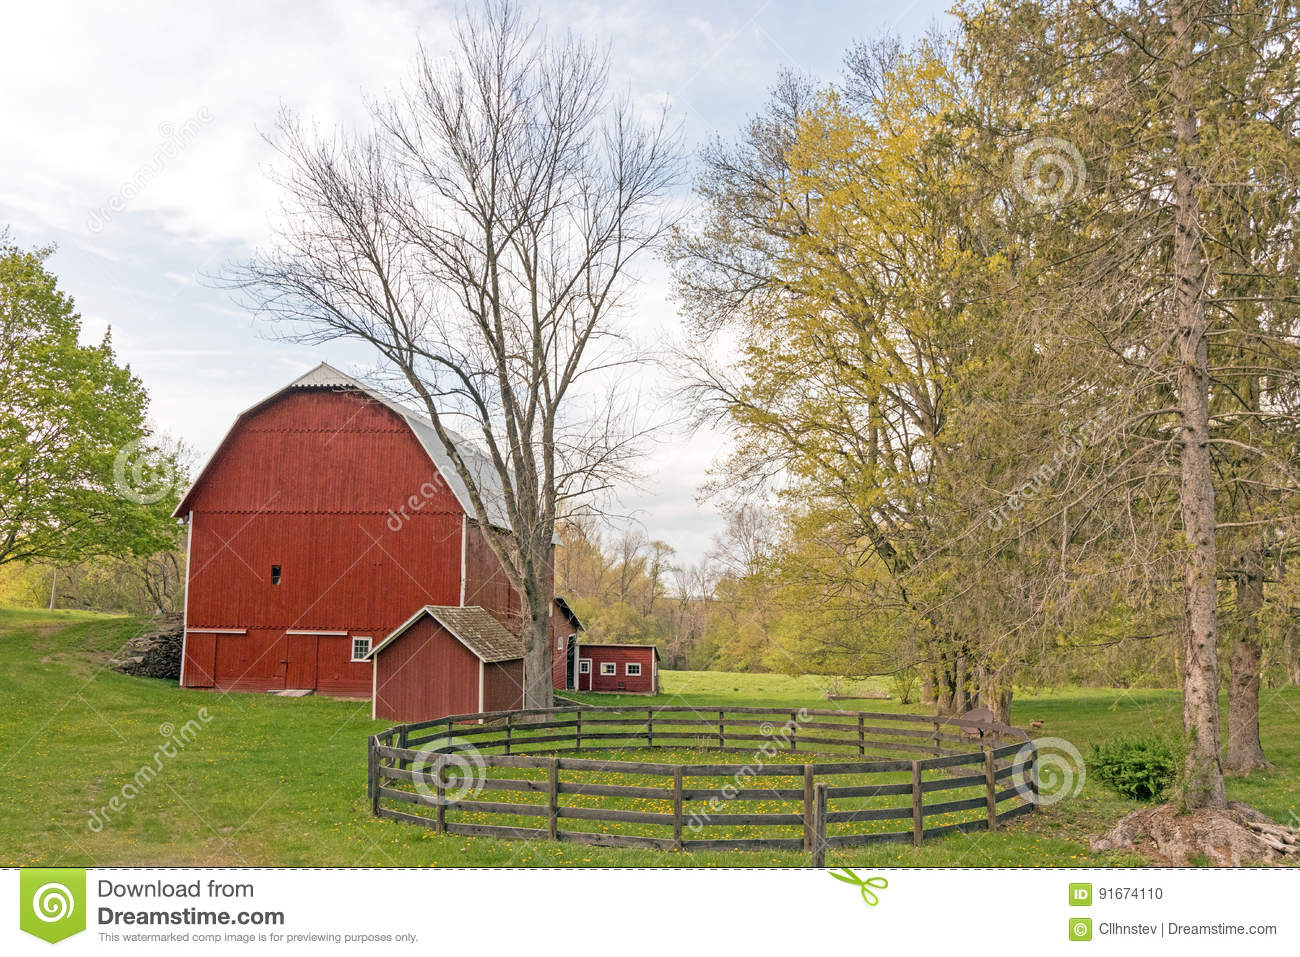 A red barn with a circular fenced enclosure out front